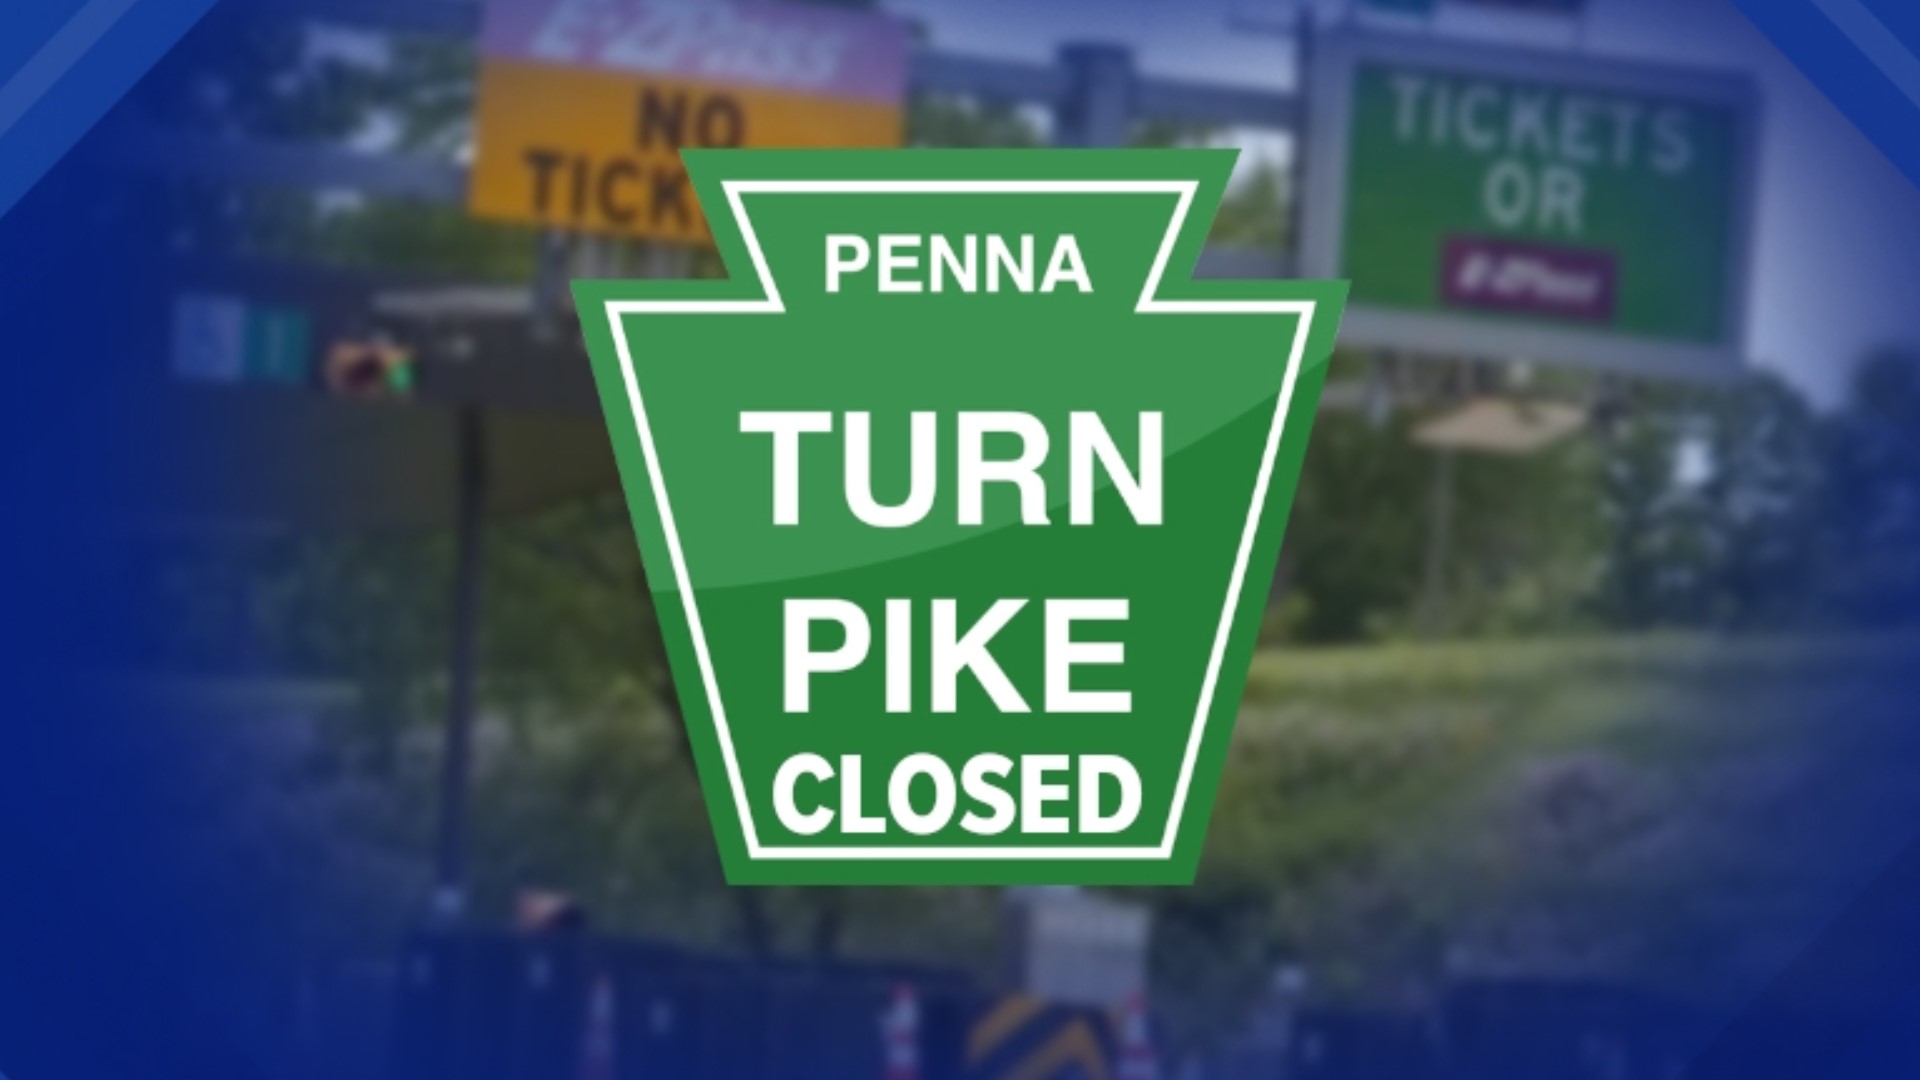 The Pennsylvania Turnpike Commission advises motorists that the Northeast Extension will be closed in both directions